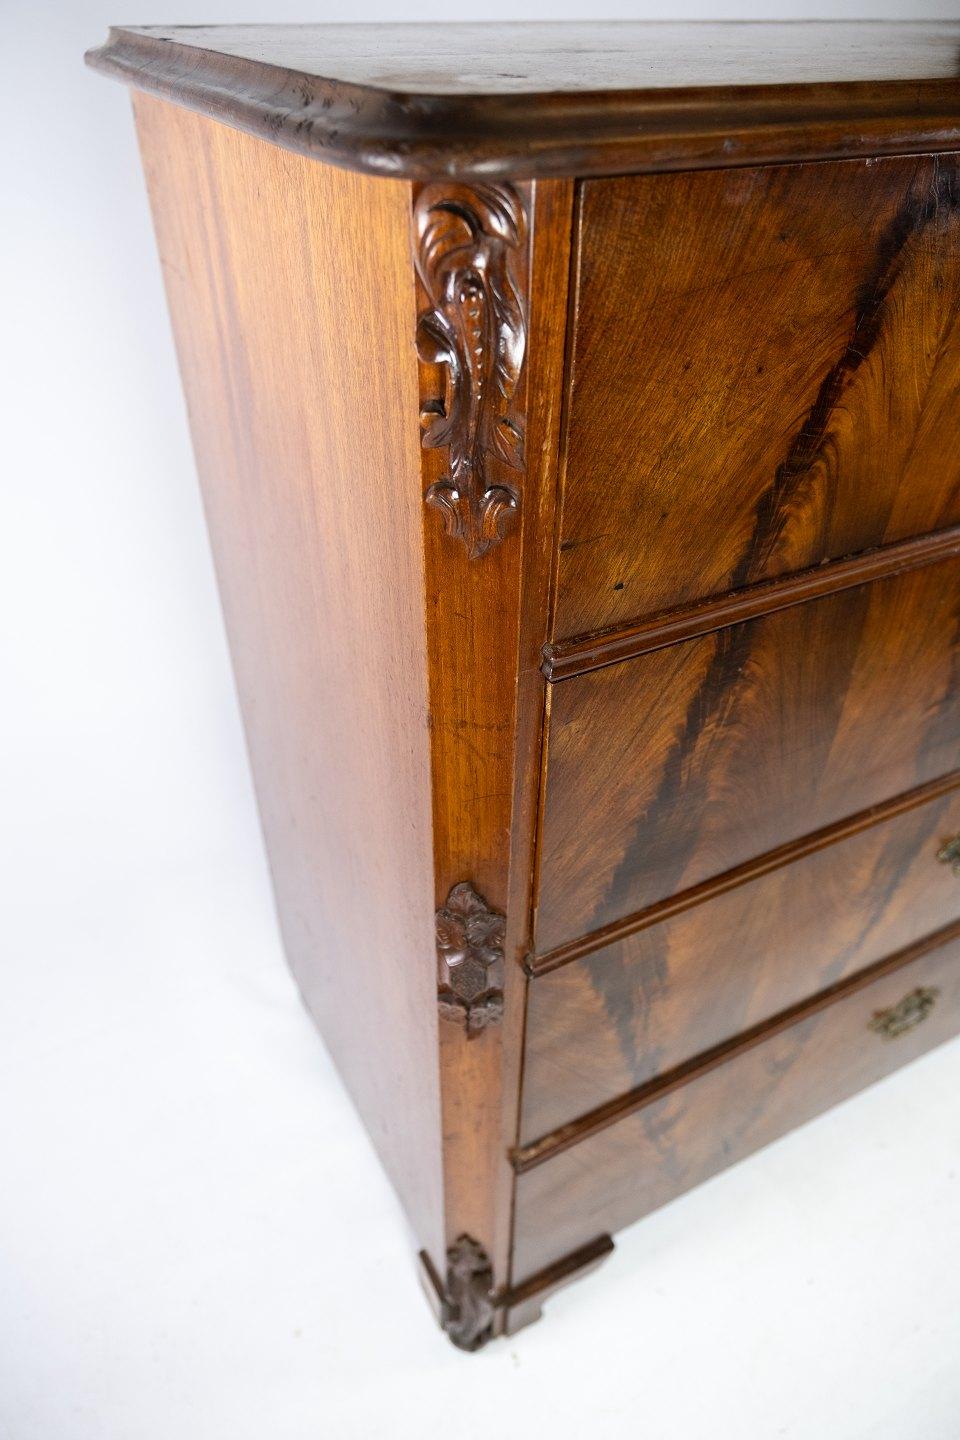 Danish Chest of Drawers of Mahogany, in Great Antique Condition from the 1860s